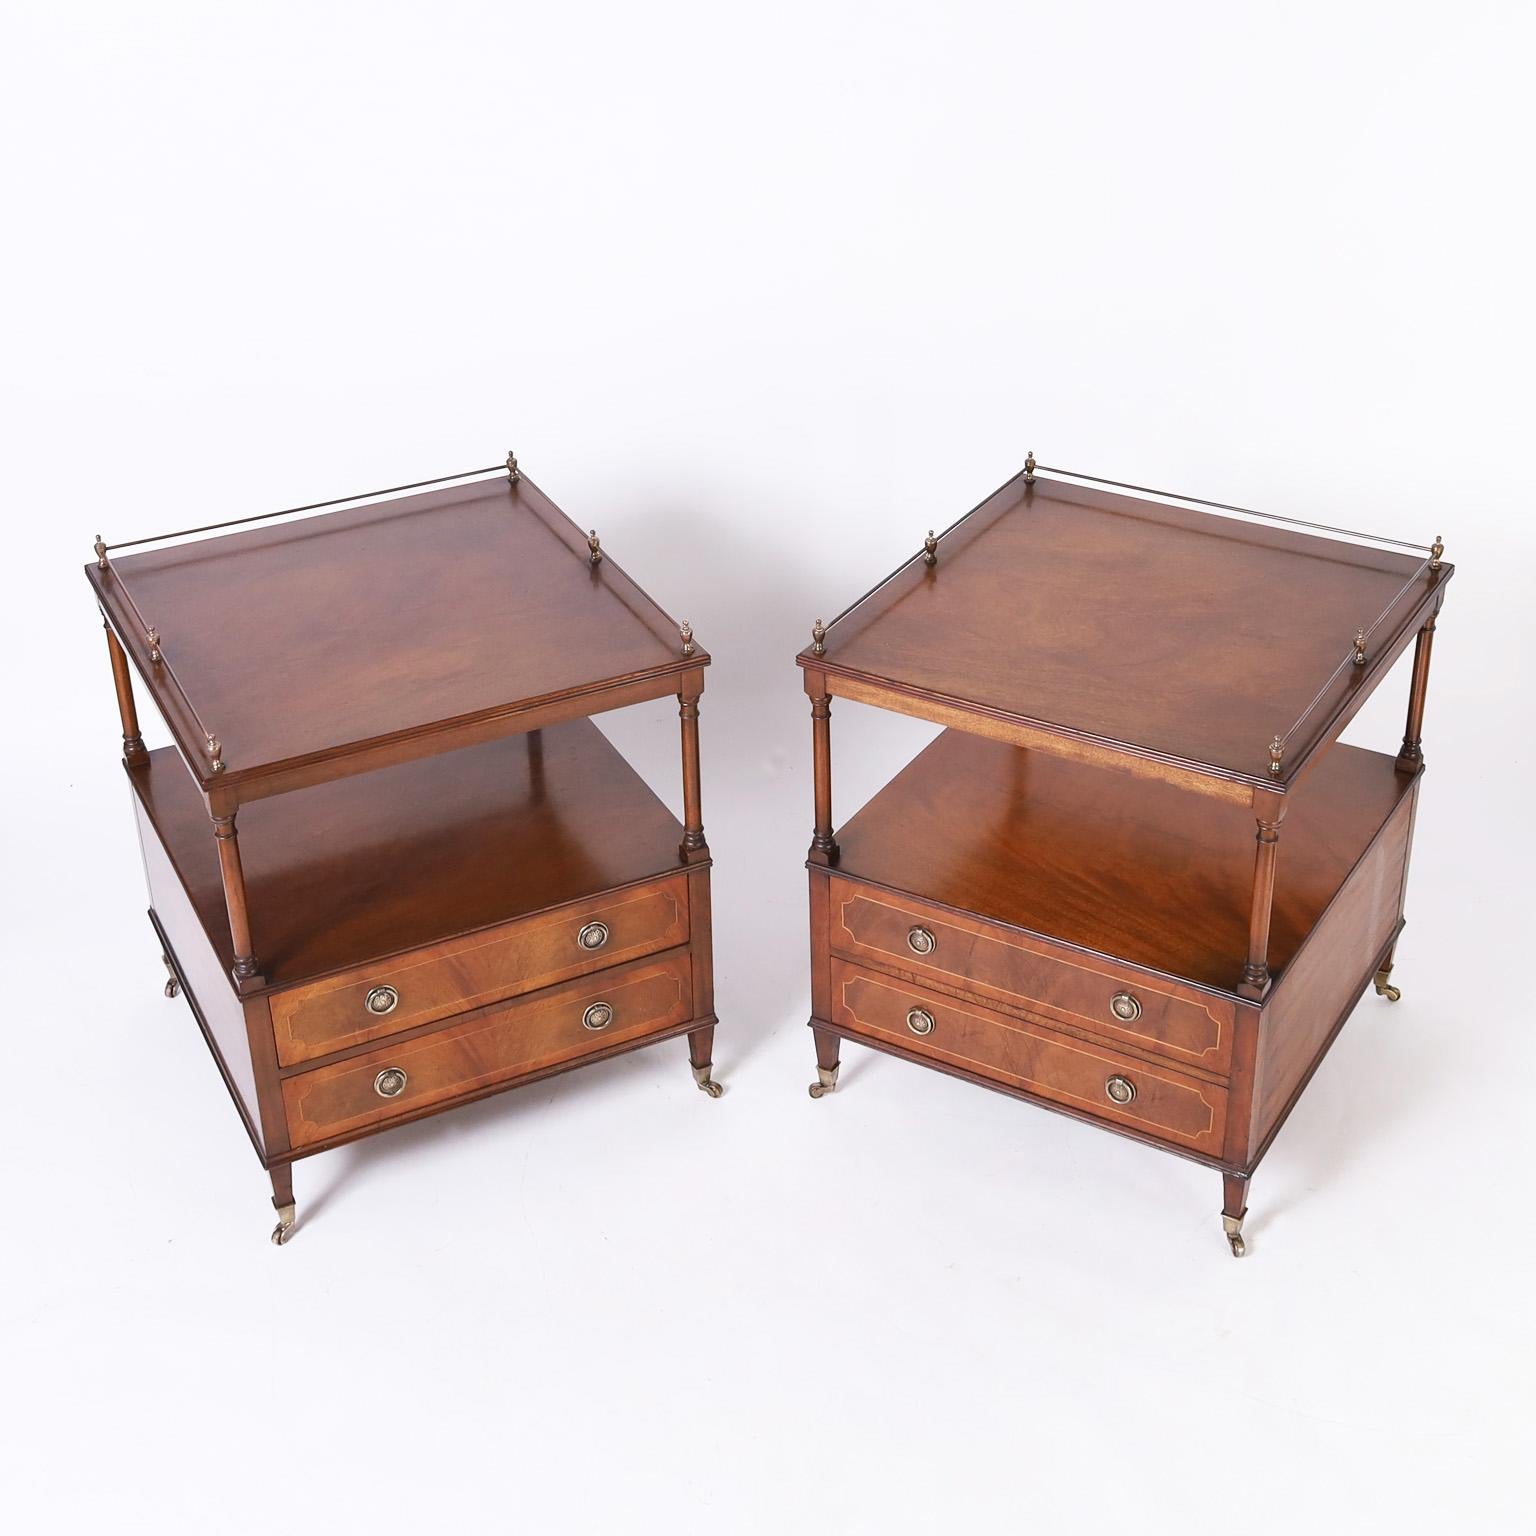 English Pair of British Colonial Style Tables or Stands